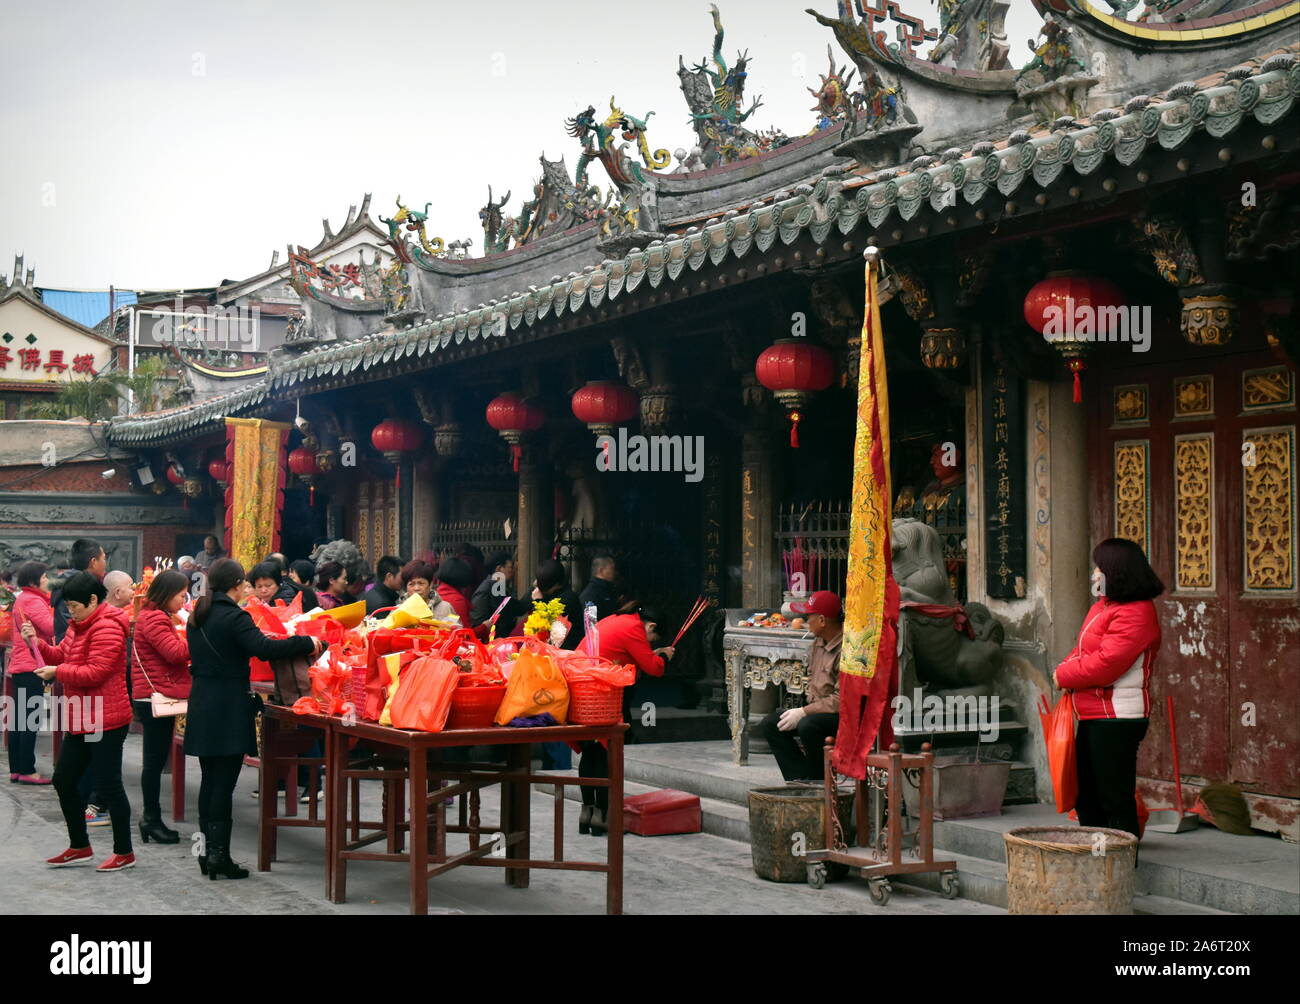 Worshipers and offerings at old Tonghuai Guanyue temple of Chinese native religion in Quanzhou Stock Photo